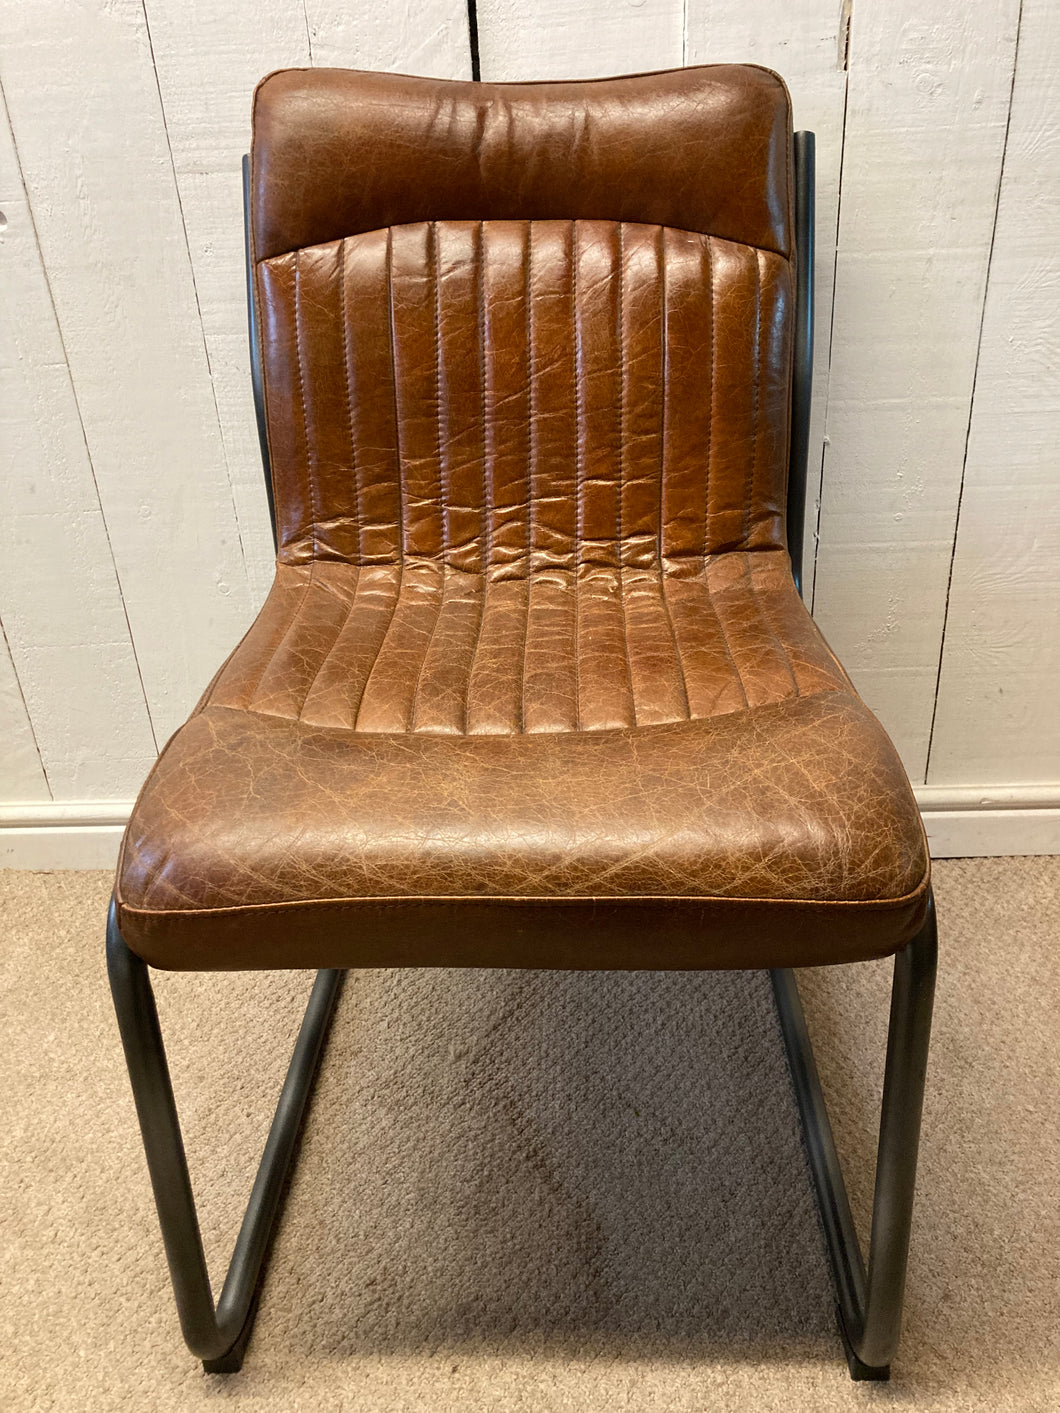 Tan Leatherette Chair On Metal Frame